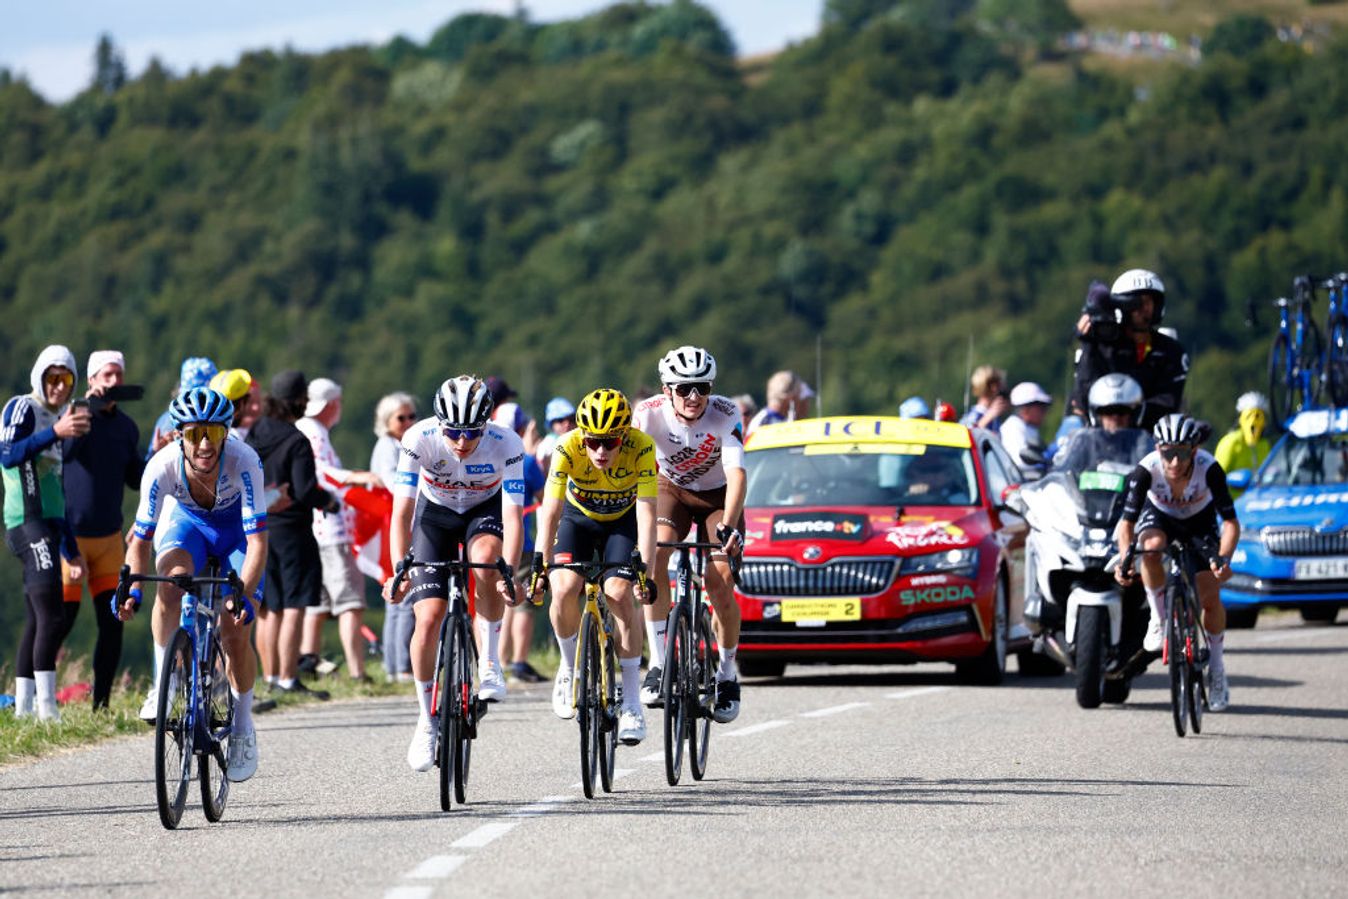 Simon Yates was often the rider attacking the likes of Tadej Pogačar and Jonas Vingegaard in last year's Tour de France